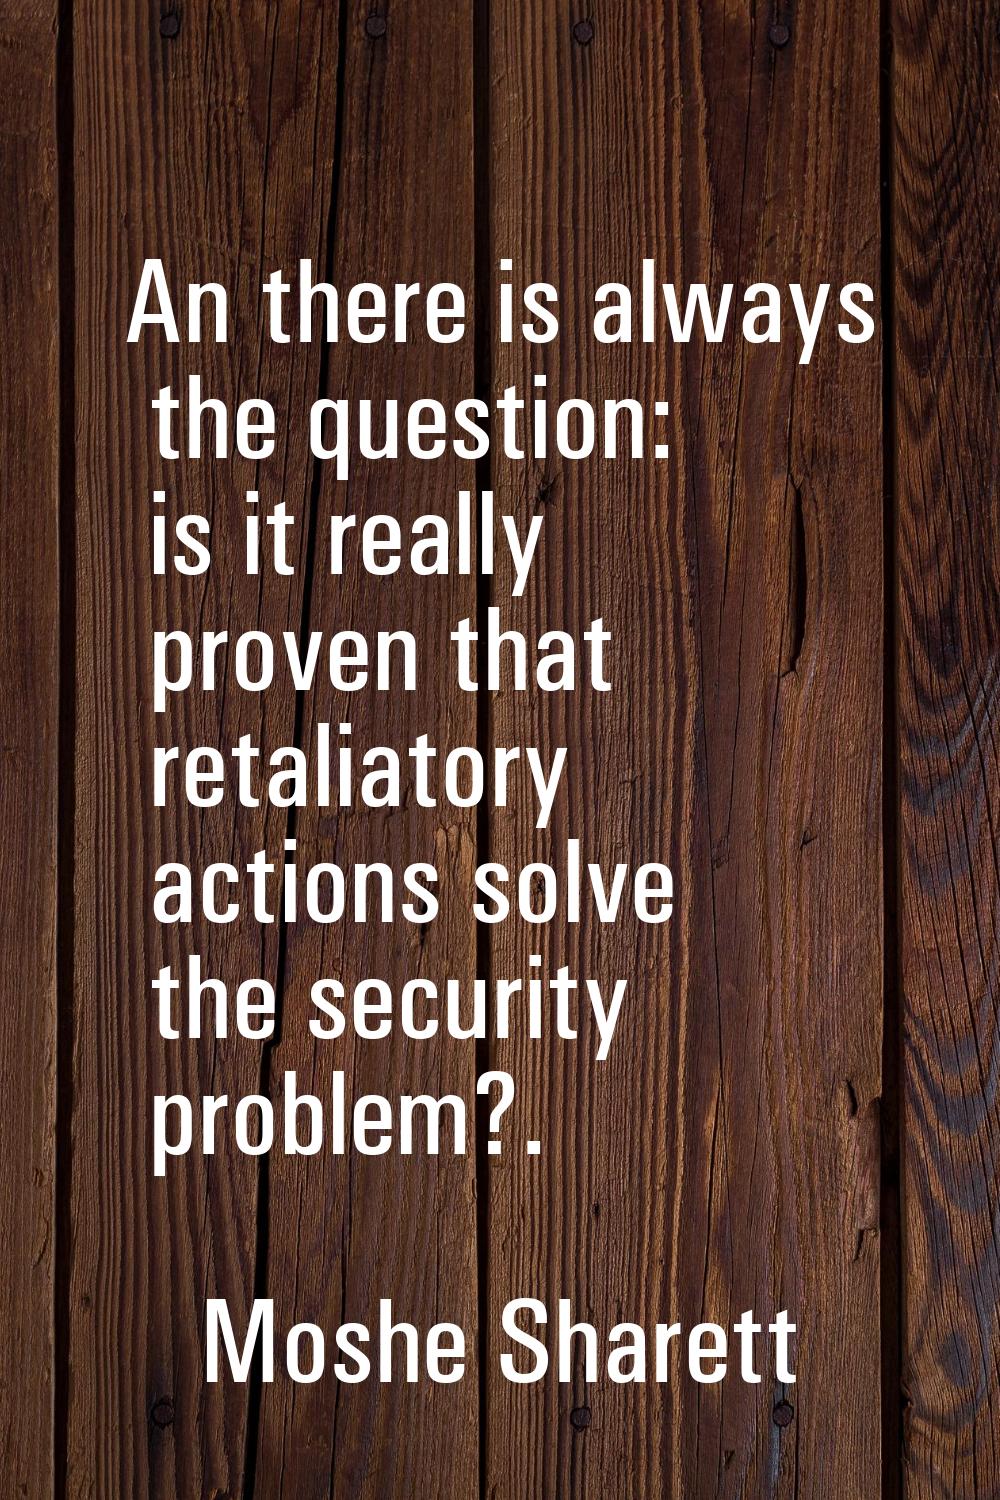 An there is always the question: is it really proven that retaliatory actions solve the security pr